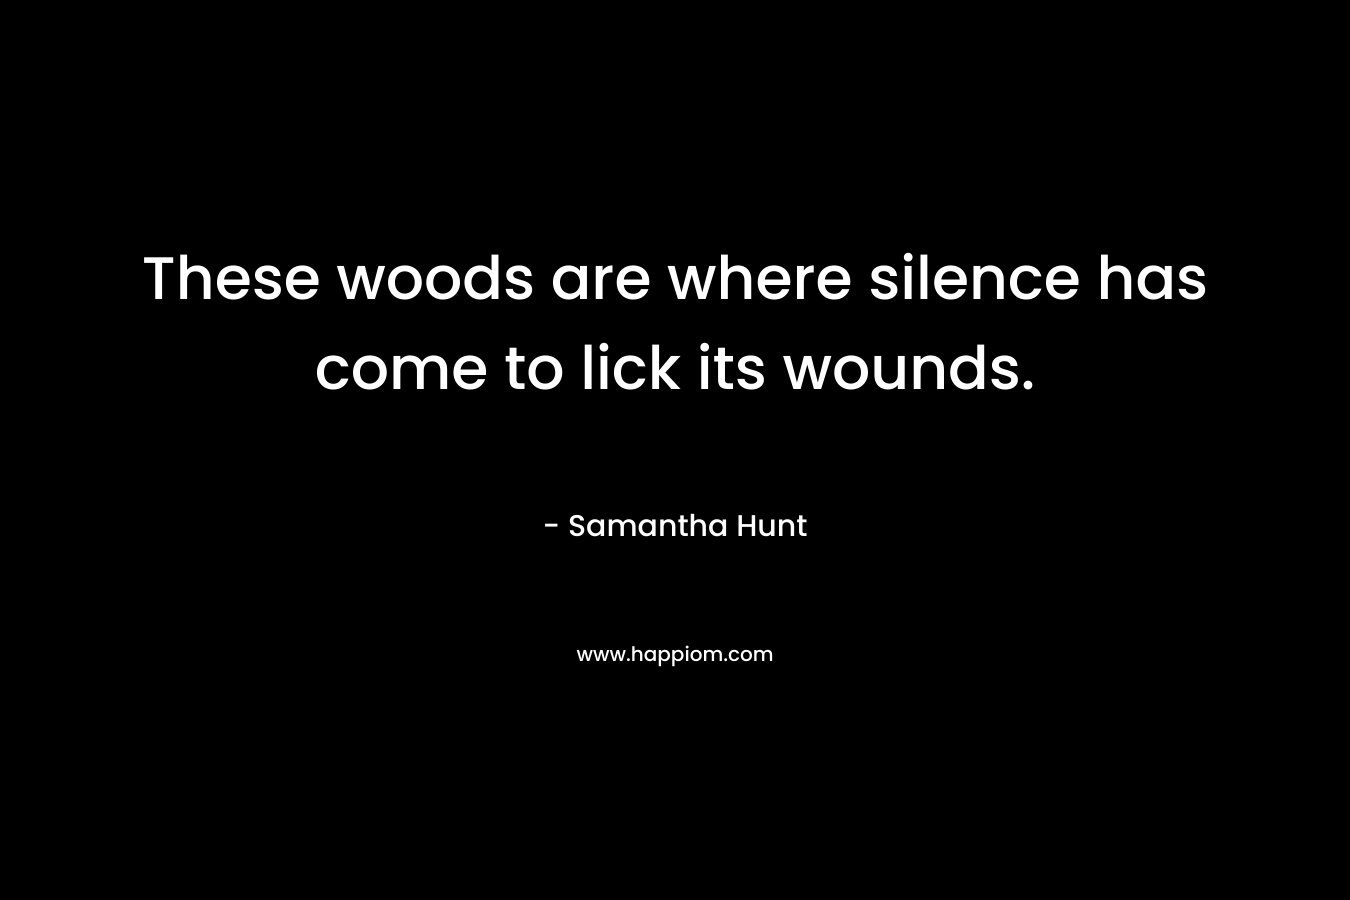 These woods are where silence has come to lick its wounds. – Samantha Hunt